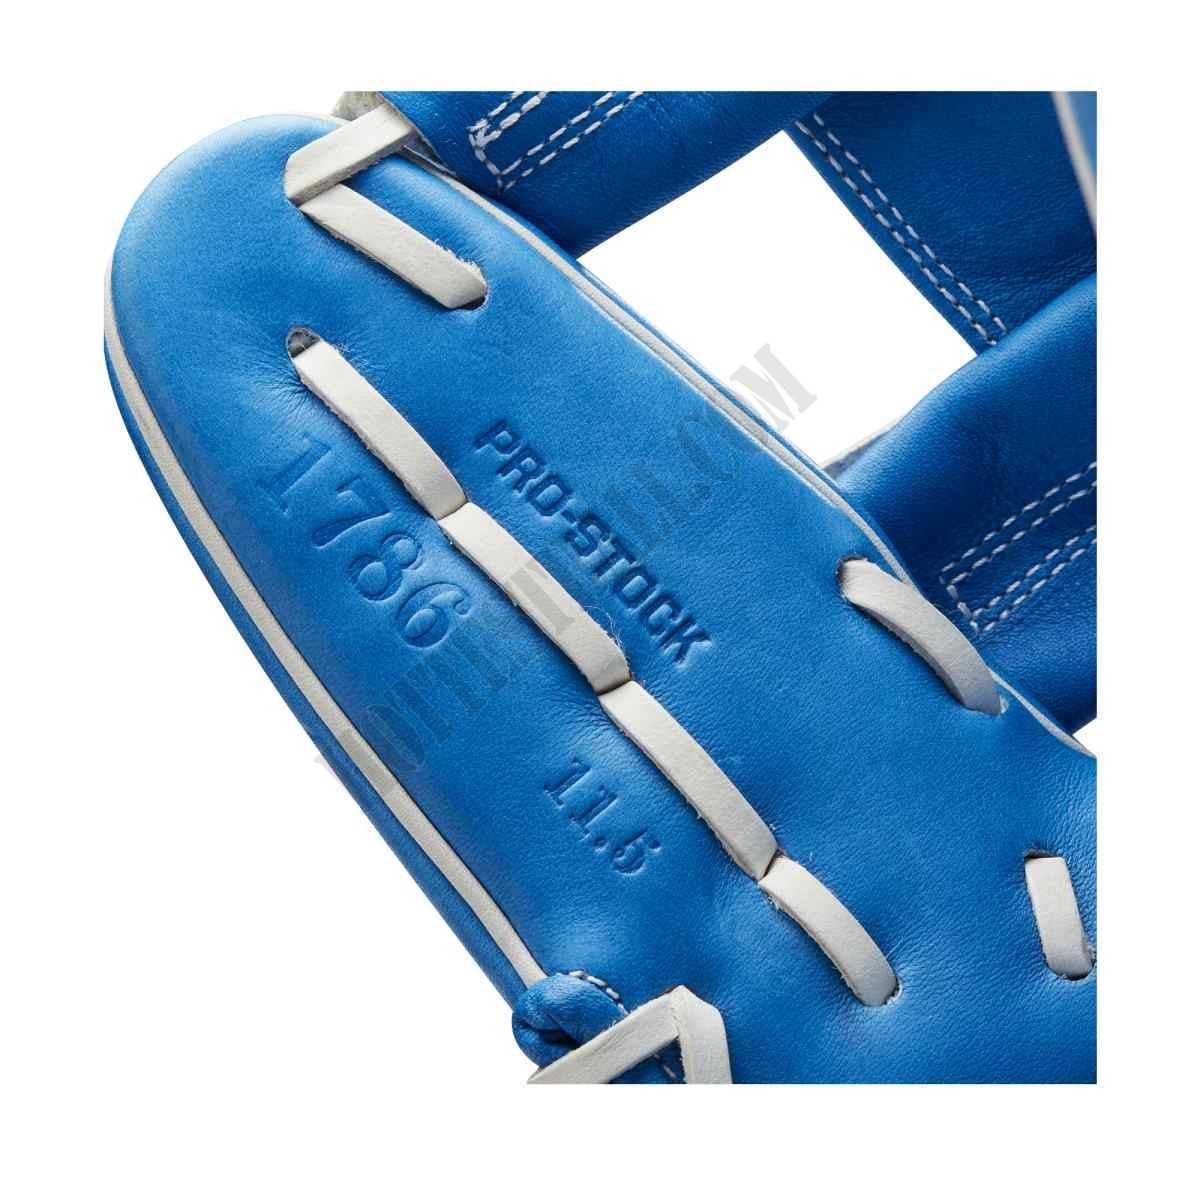 2022 Autism Speaks A2000 1786 11.5" Infield Baseball Glove - Limited Edition ● Wilson Promotions - -7